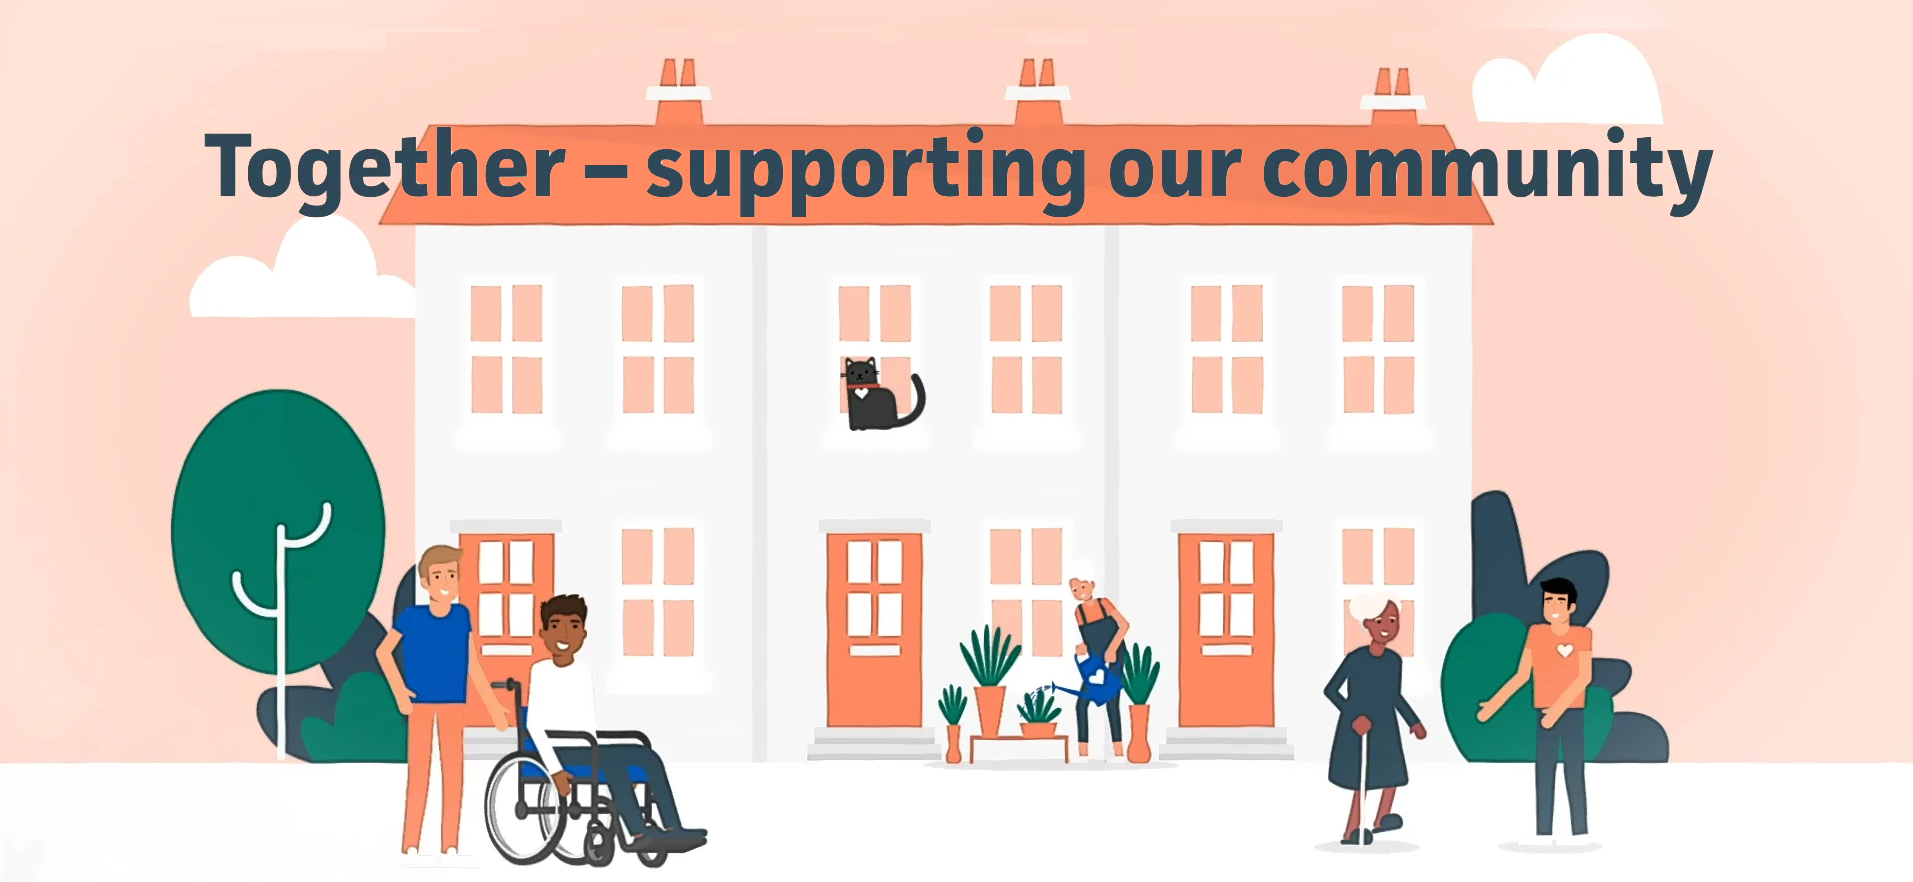 Graphic stating "Together - supporting our community"